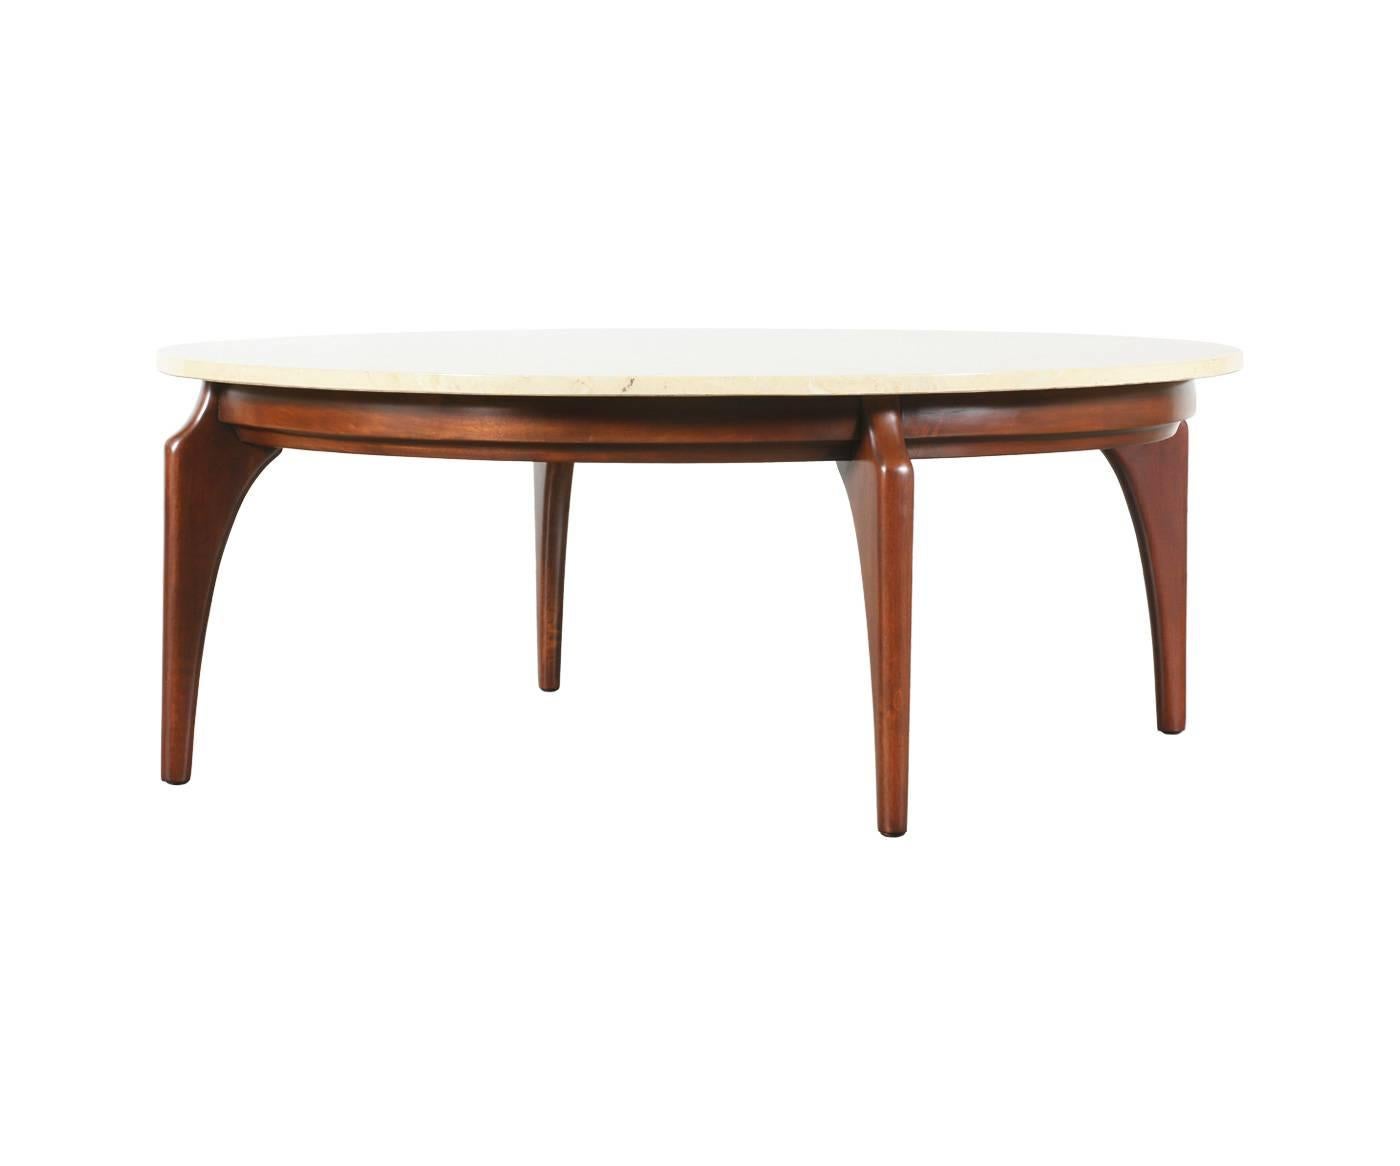 Designer: Unknown.
Manufacturer: Unknown.
Period/Style: Mid-Century Modern.
Country: United States.
Date: 1960s.

Dimensions: 16″ H x 42.25″ W.
Materials: Walnut, marble.
Condition: Excellent, newly refinished.
Number of items: 1.
ID